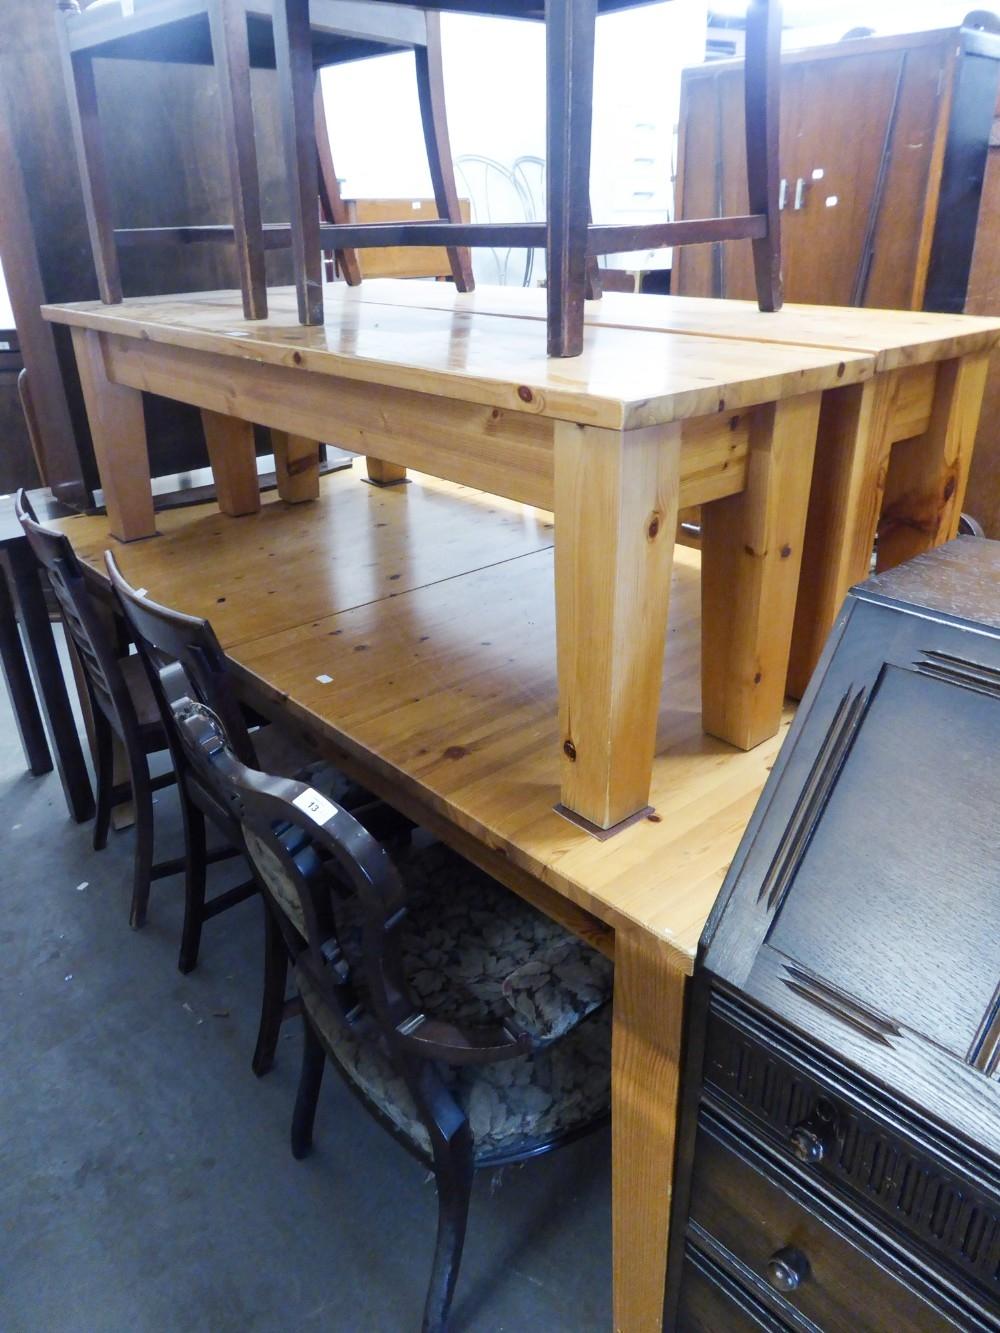 A LARGE PINE EXTENDING DINING TABLE, WITH TWO BENCH SEATS AND A SIMILAR DINING CHAIR (4)